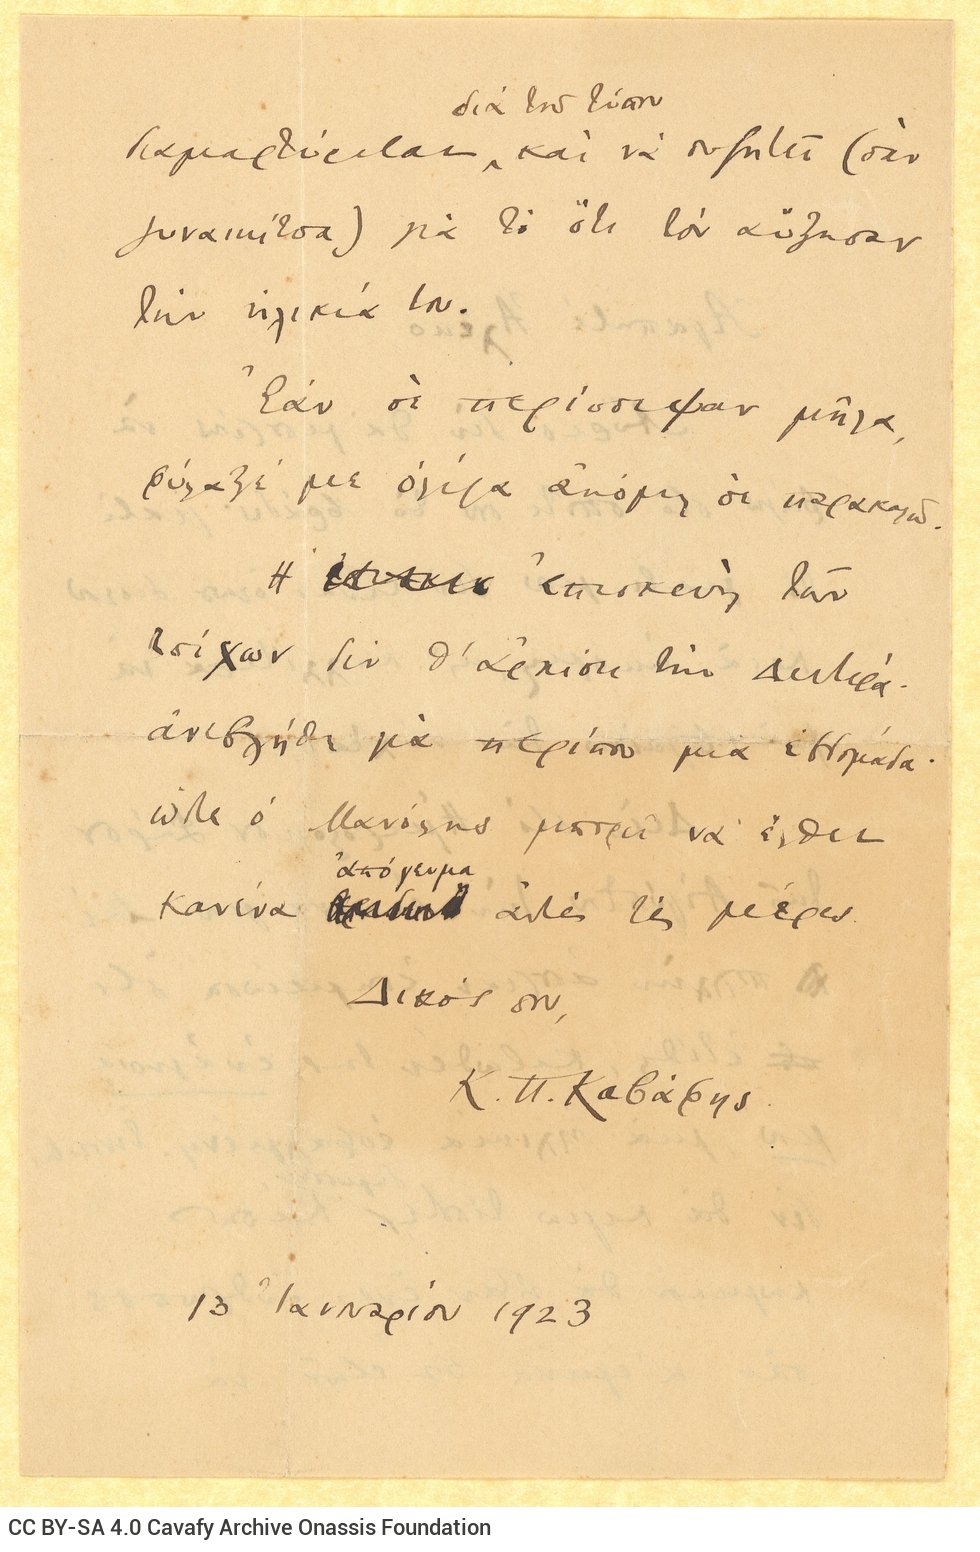 Handwritten draft letter by Cavafy to Alekos Singopoulo on both sides of a sheet; cancellations and emendations. C. P. Cavafy